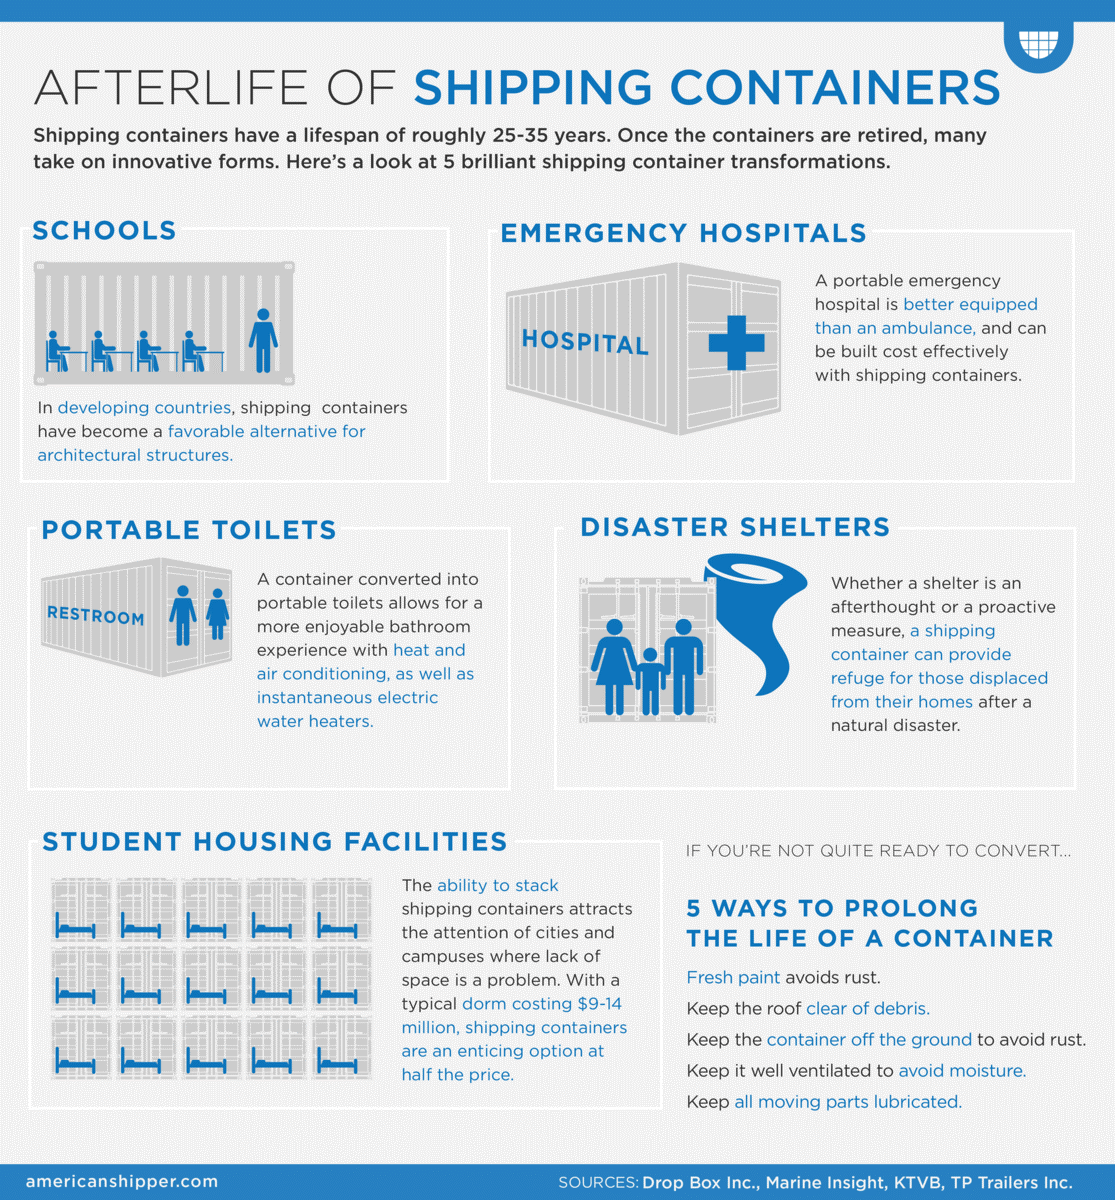 SHIPPING CONTAINERS 2.0